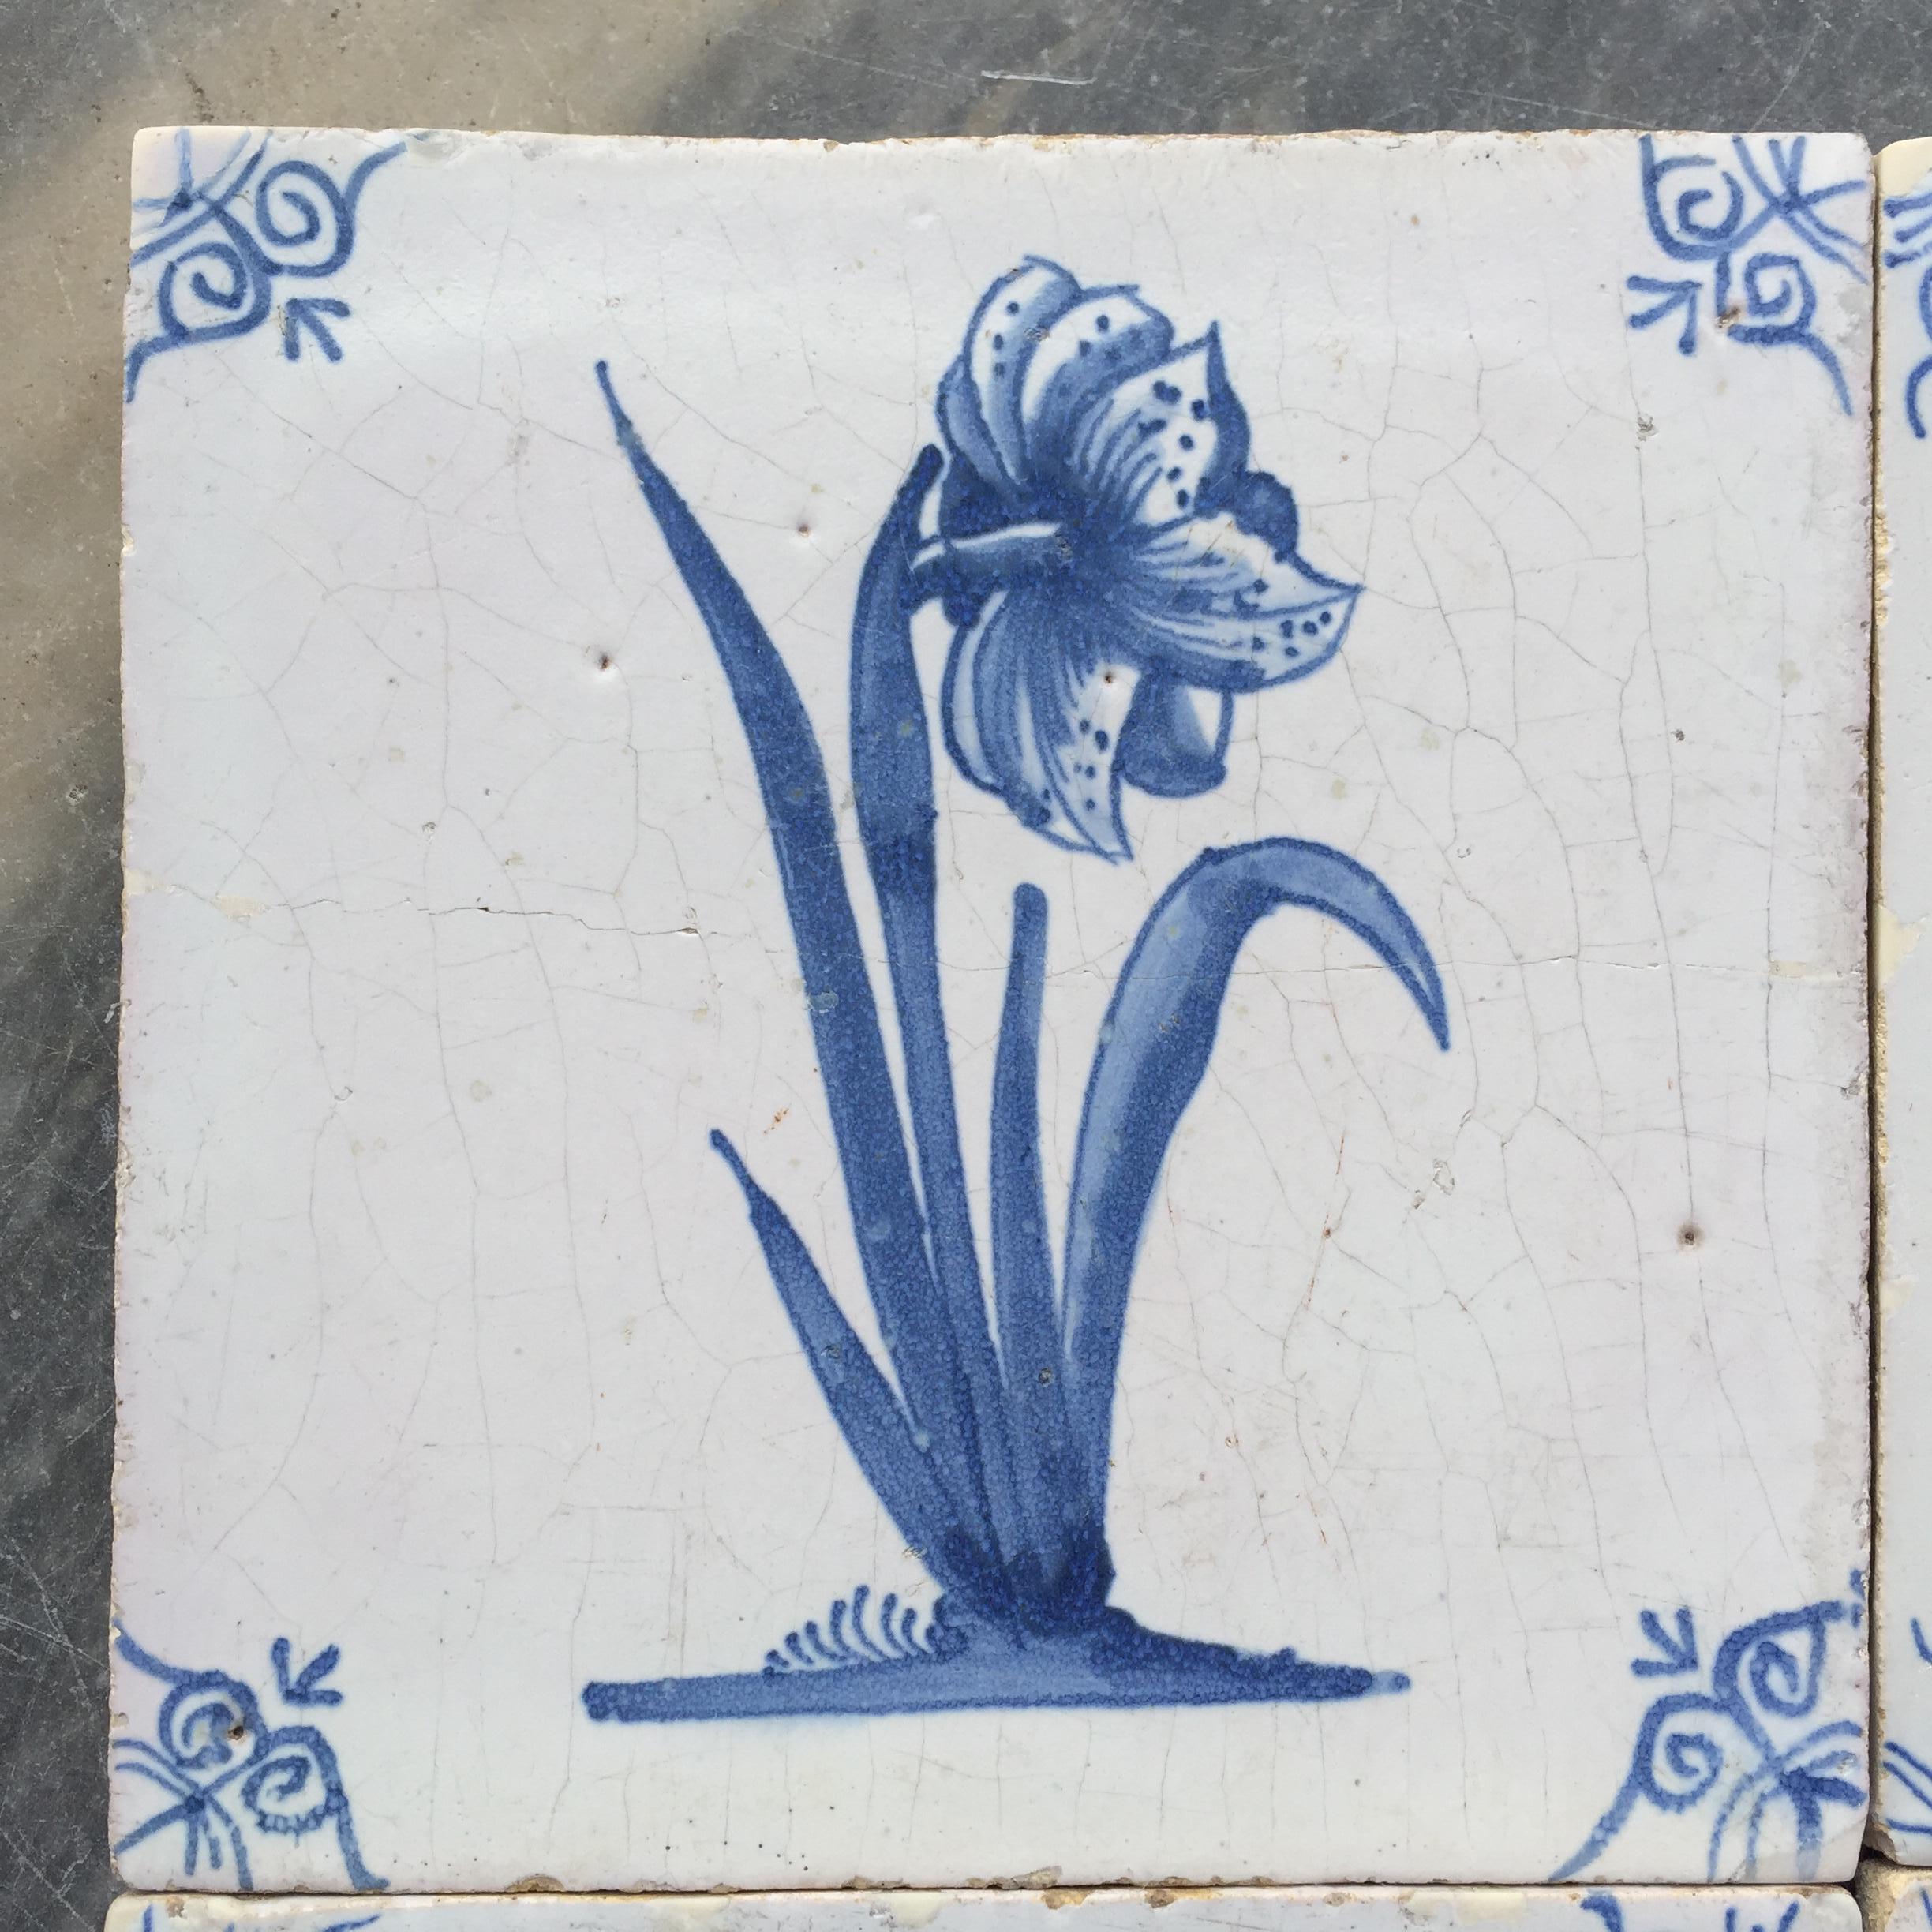 Ceramic Rare Set of 12 Dutch Delft Tiles with Flowers and Insects, 17th Century